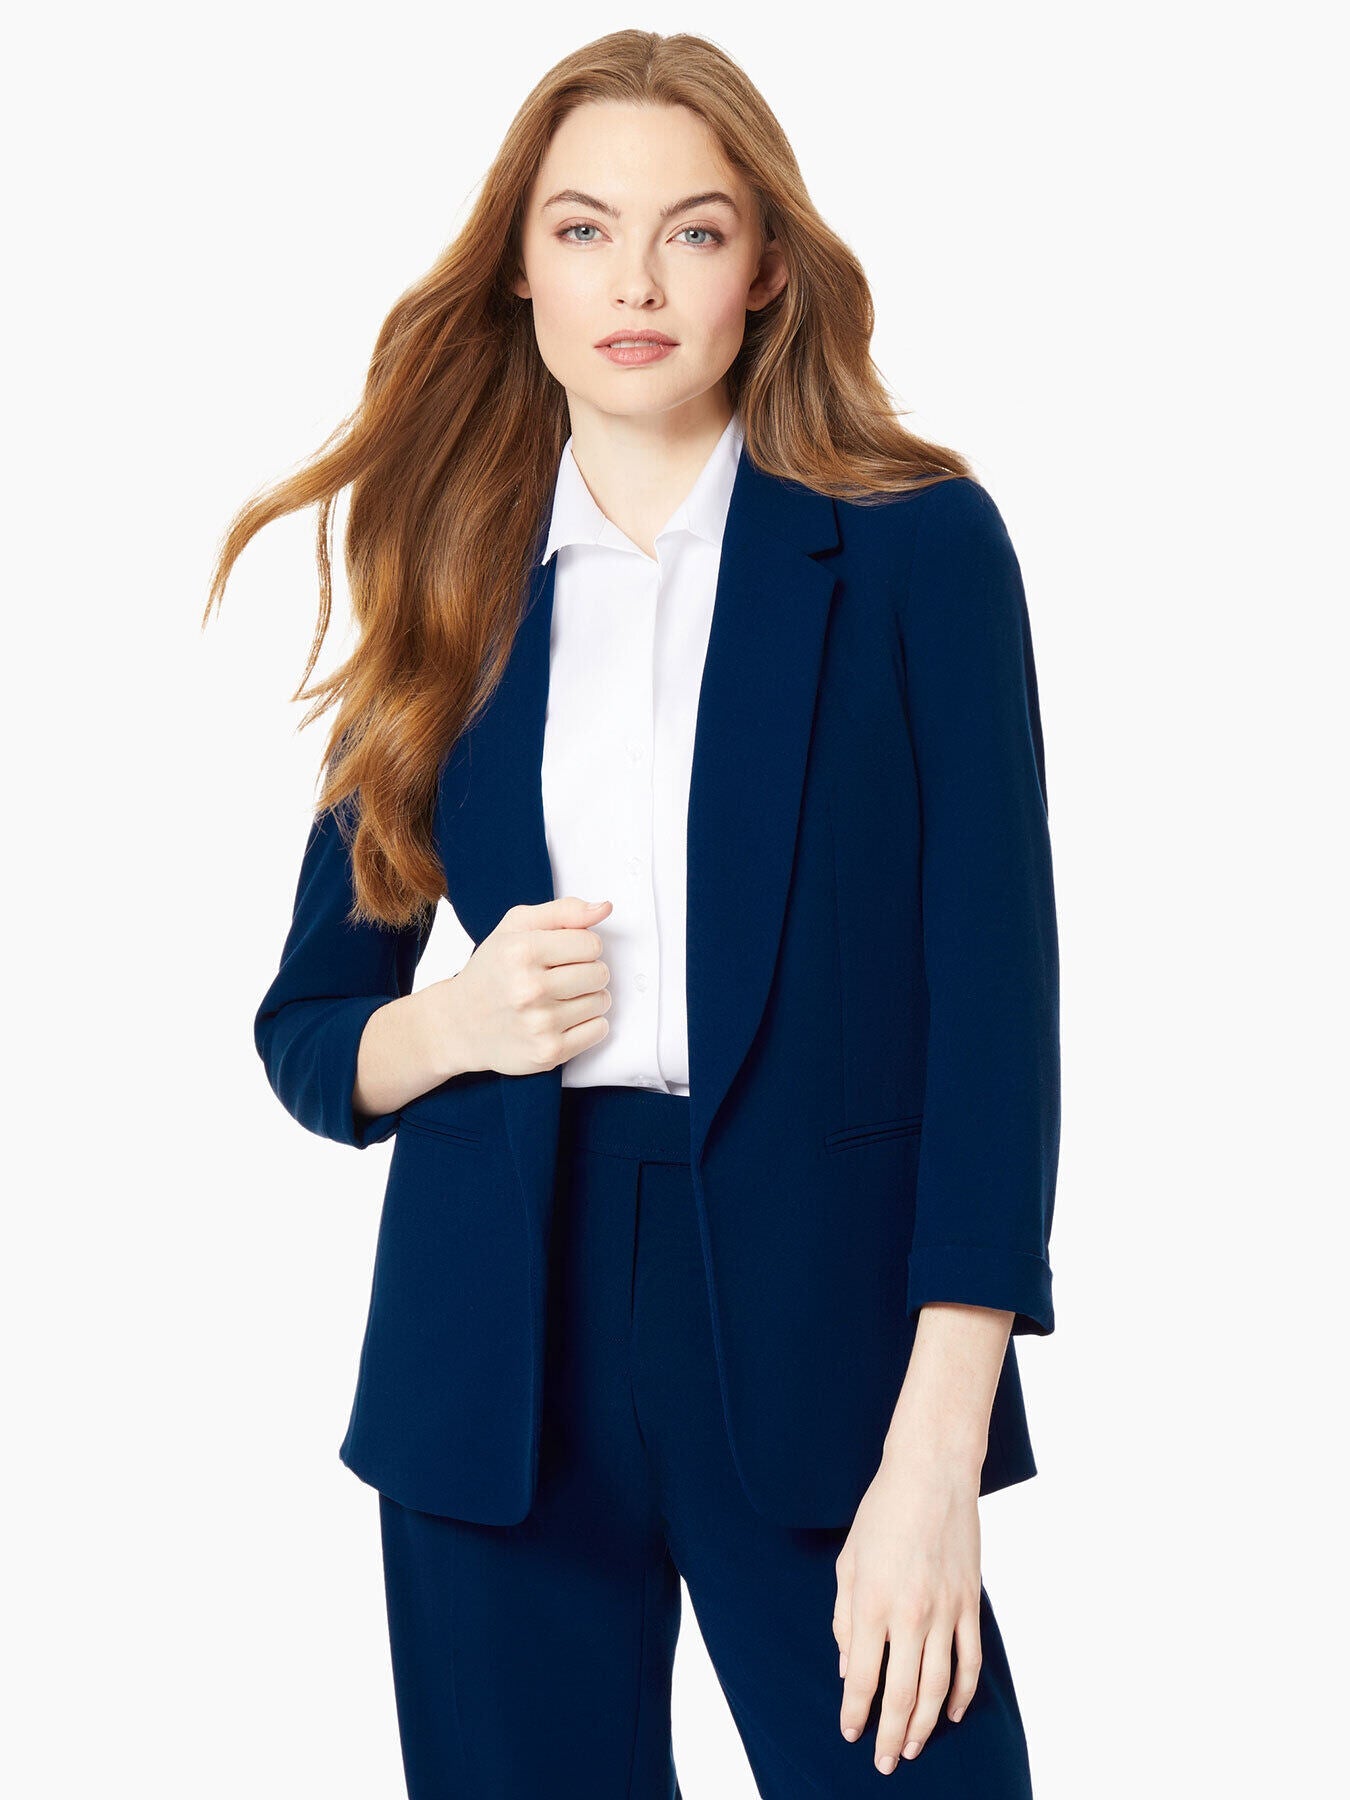  Black Solid Women Suits Slim Fit Womens Suits for Work  Professional One Button 3 Piece Outfits for Women Custom Size : Clothing,  Shoes & Jewelry